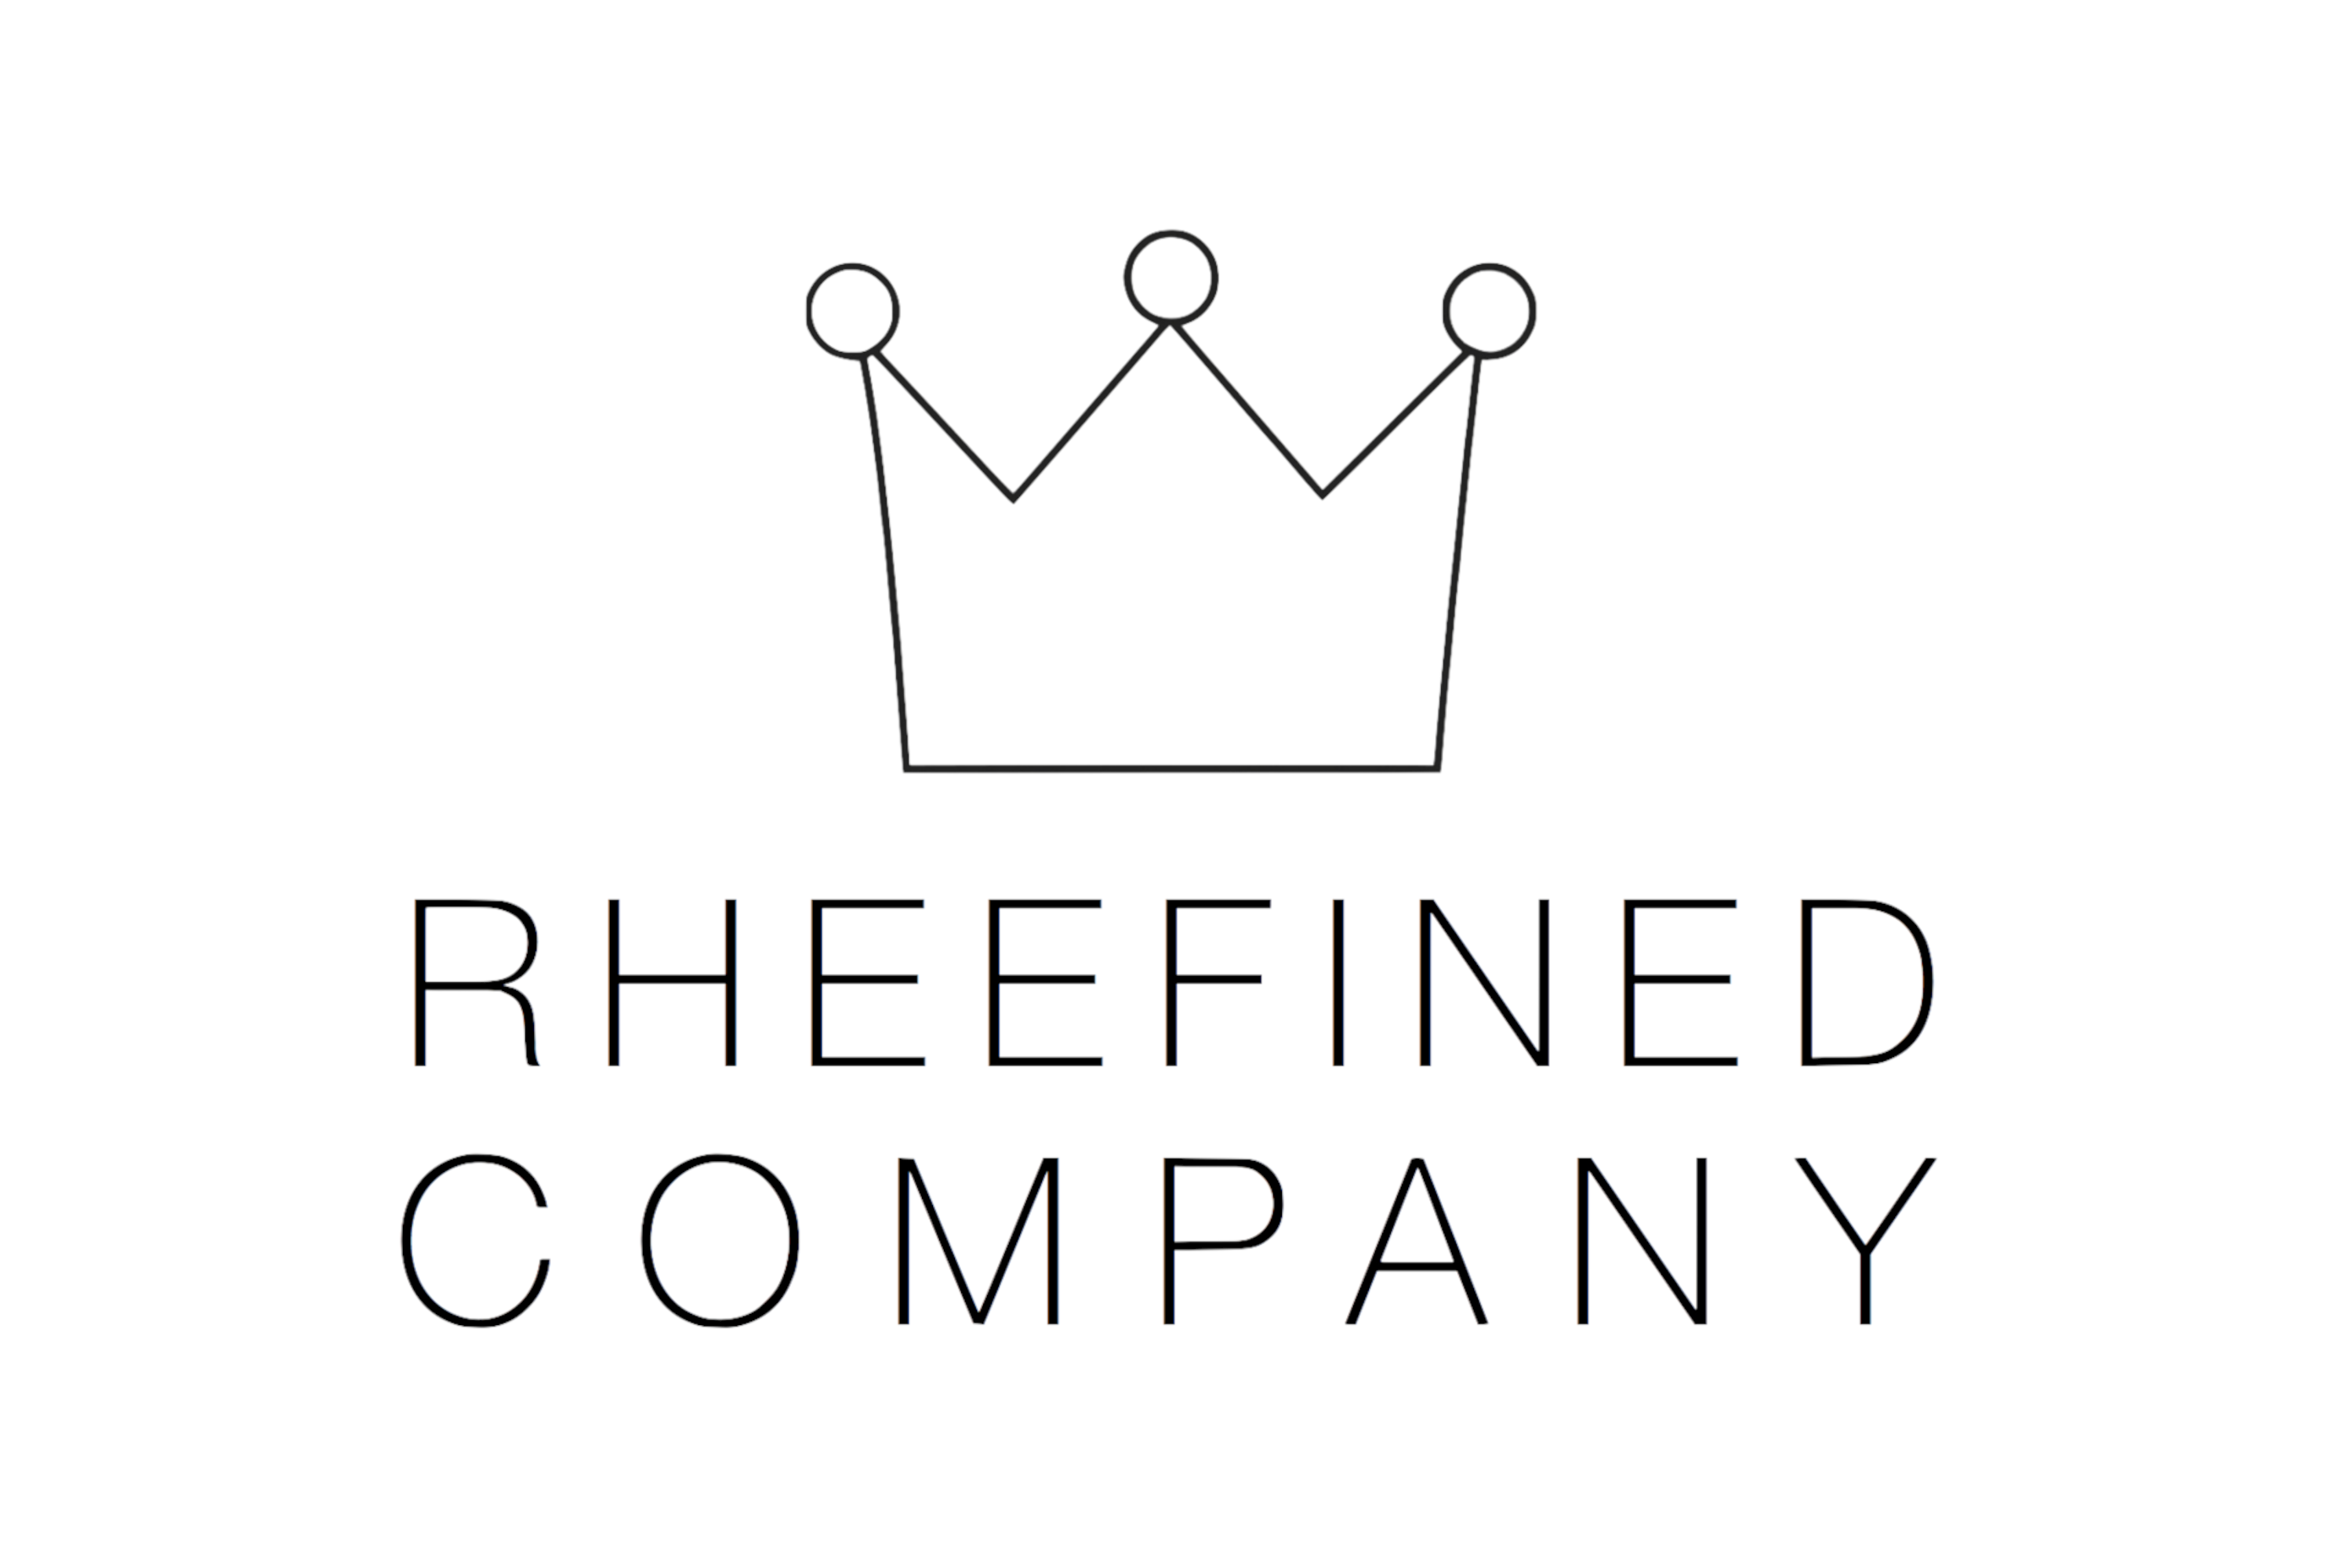 Rheefined Company Logo with illustration of crown above text